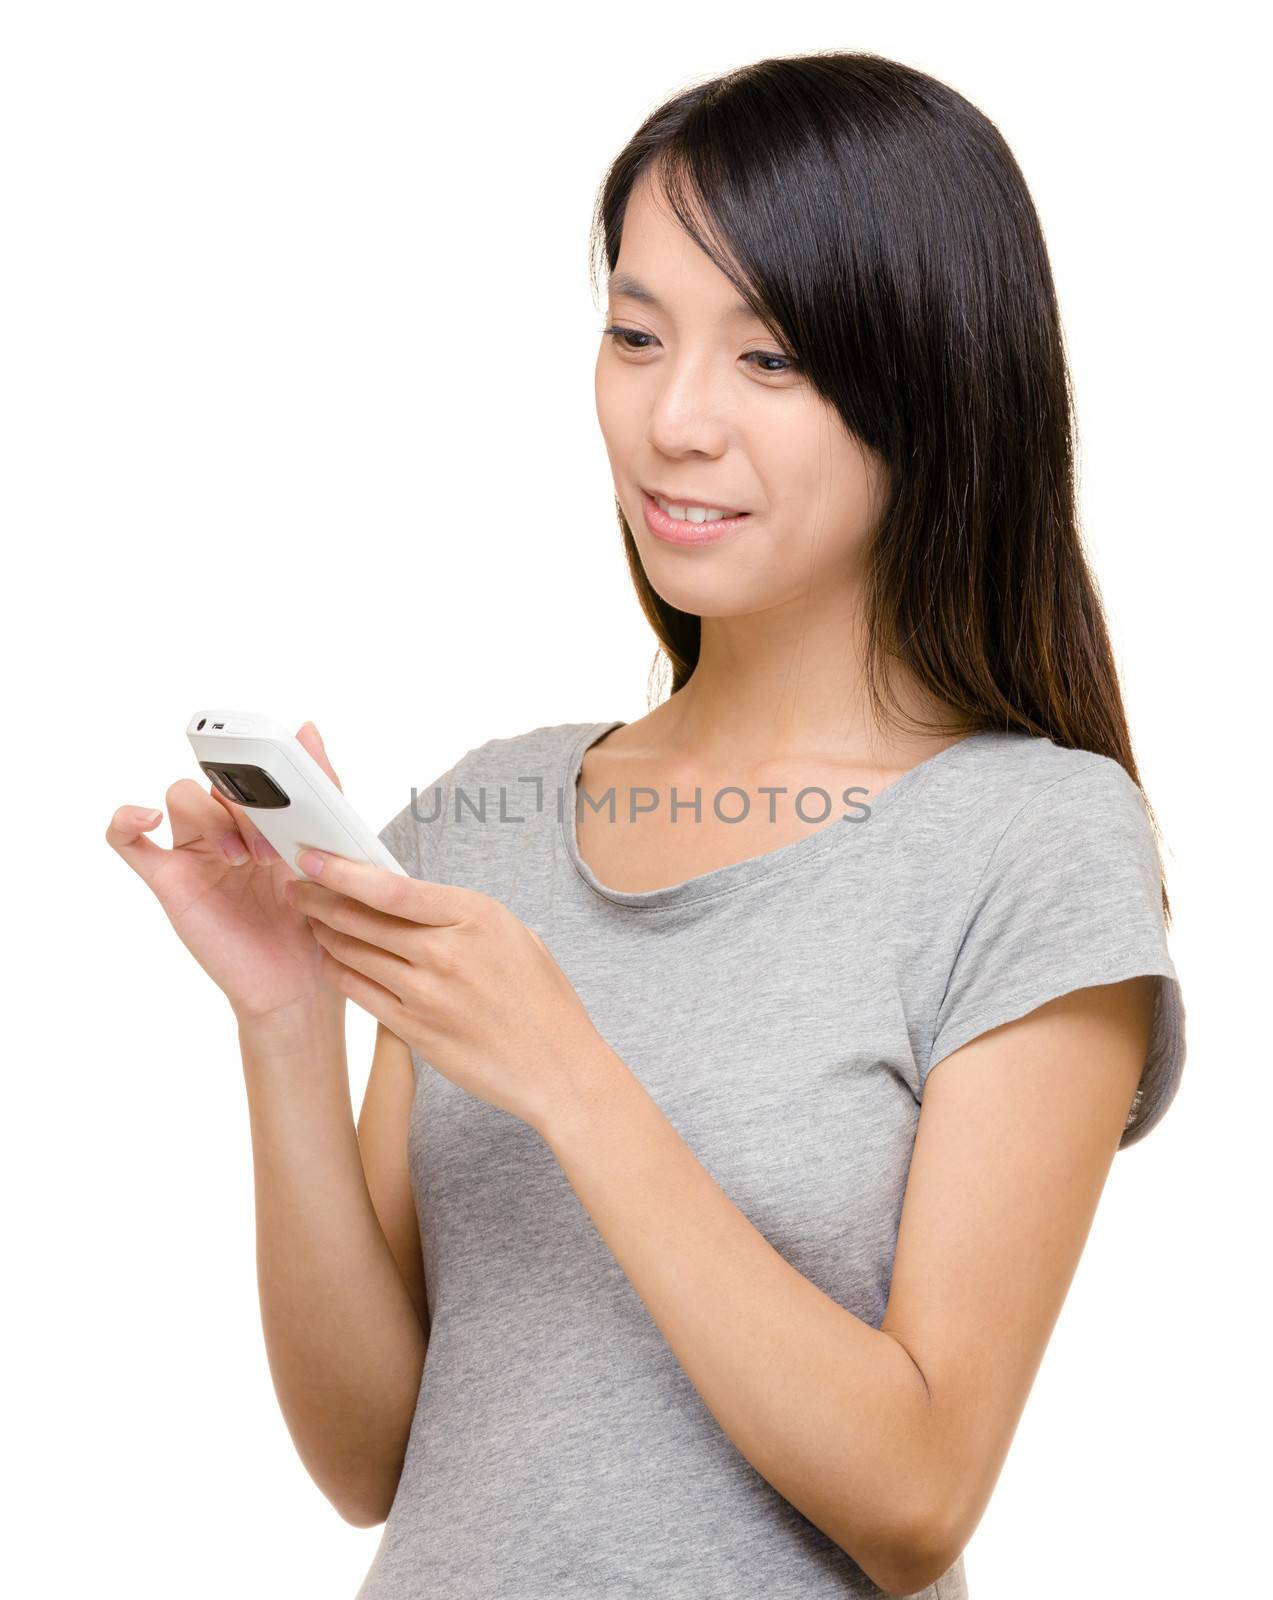 Asian woman read sms on phone